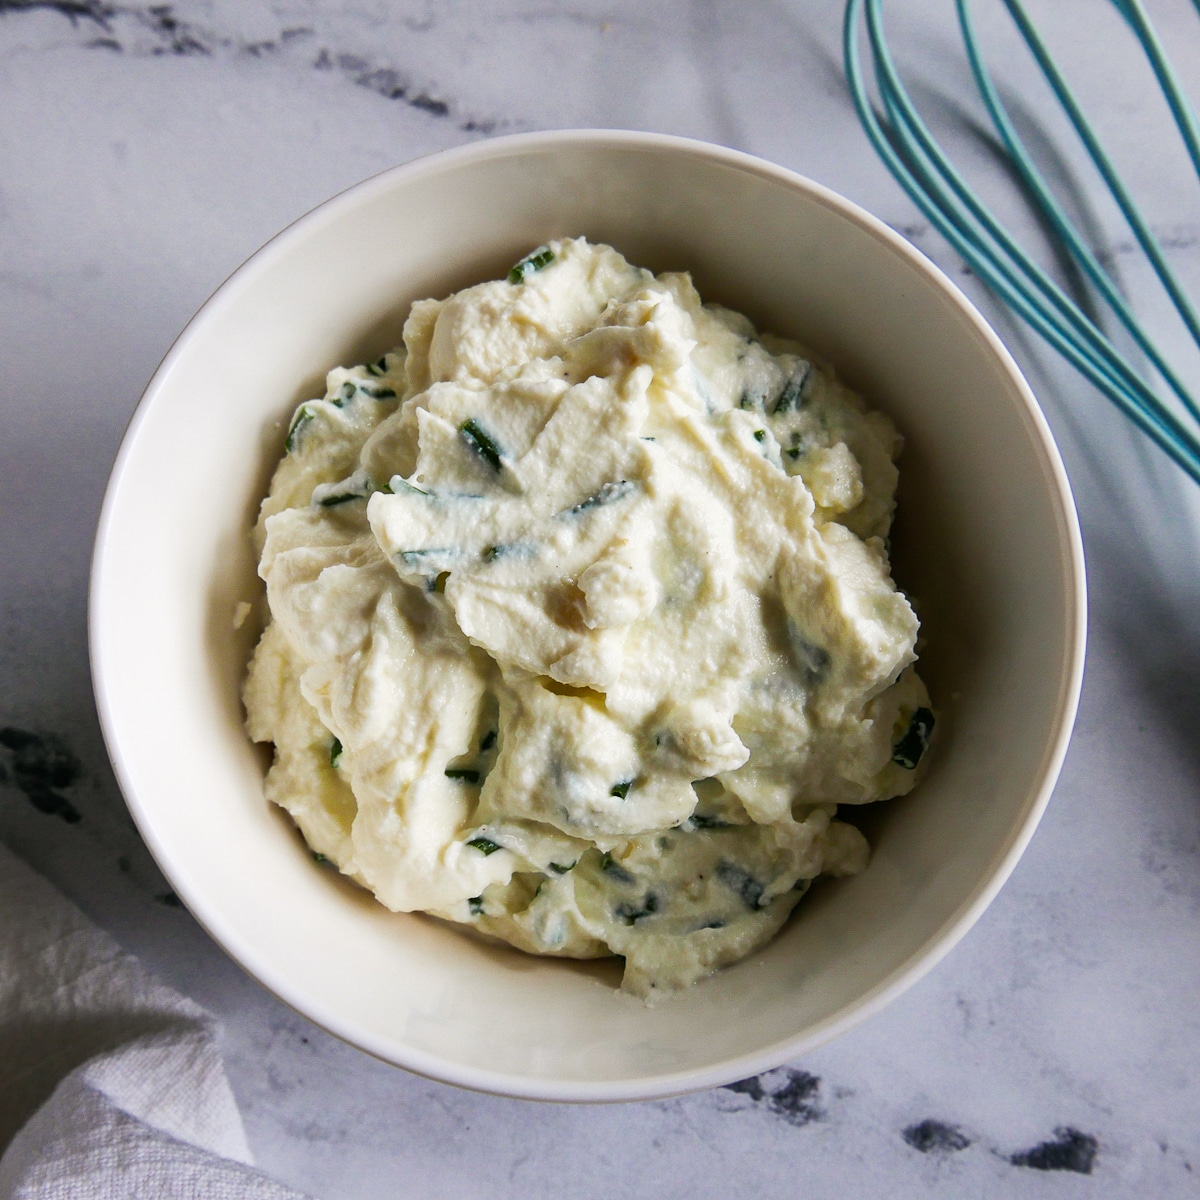 ricotta, garlic, chives, salt, and pepper whisked together.